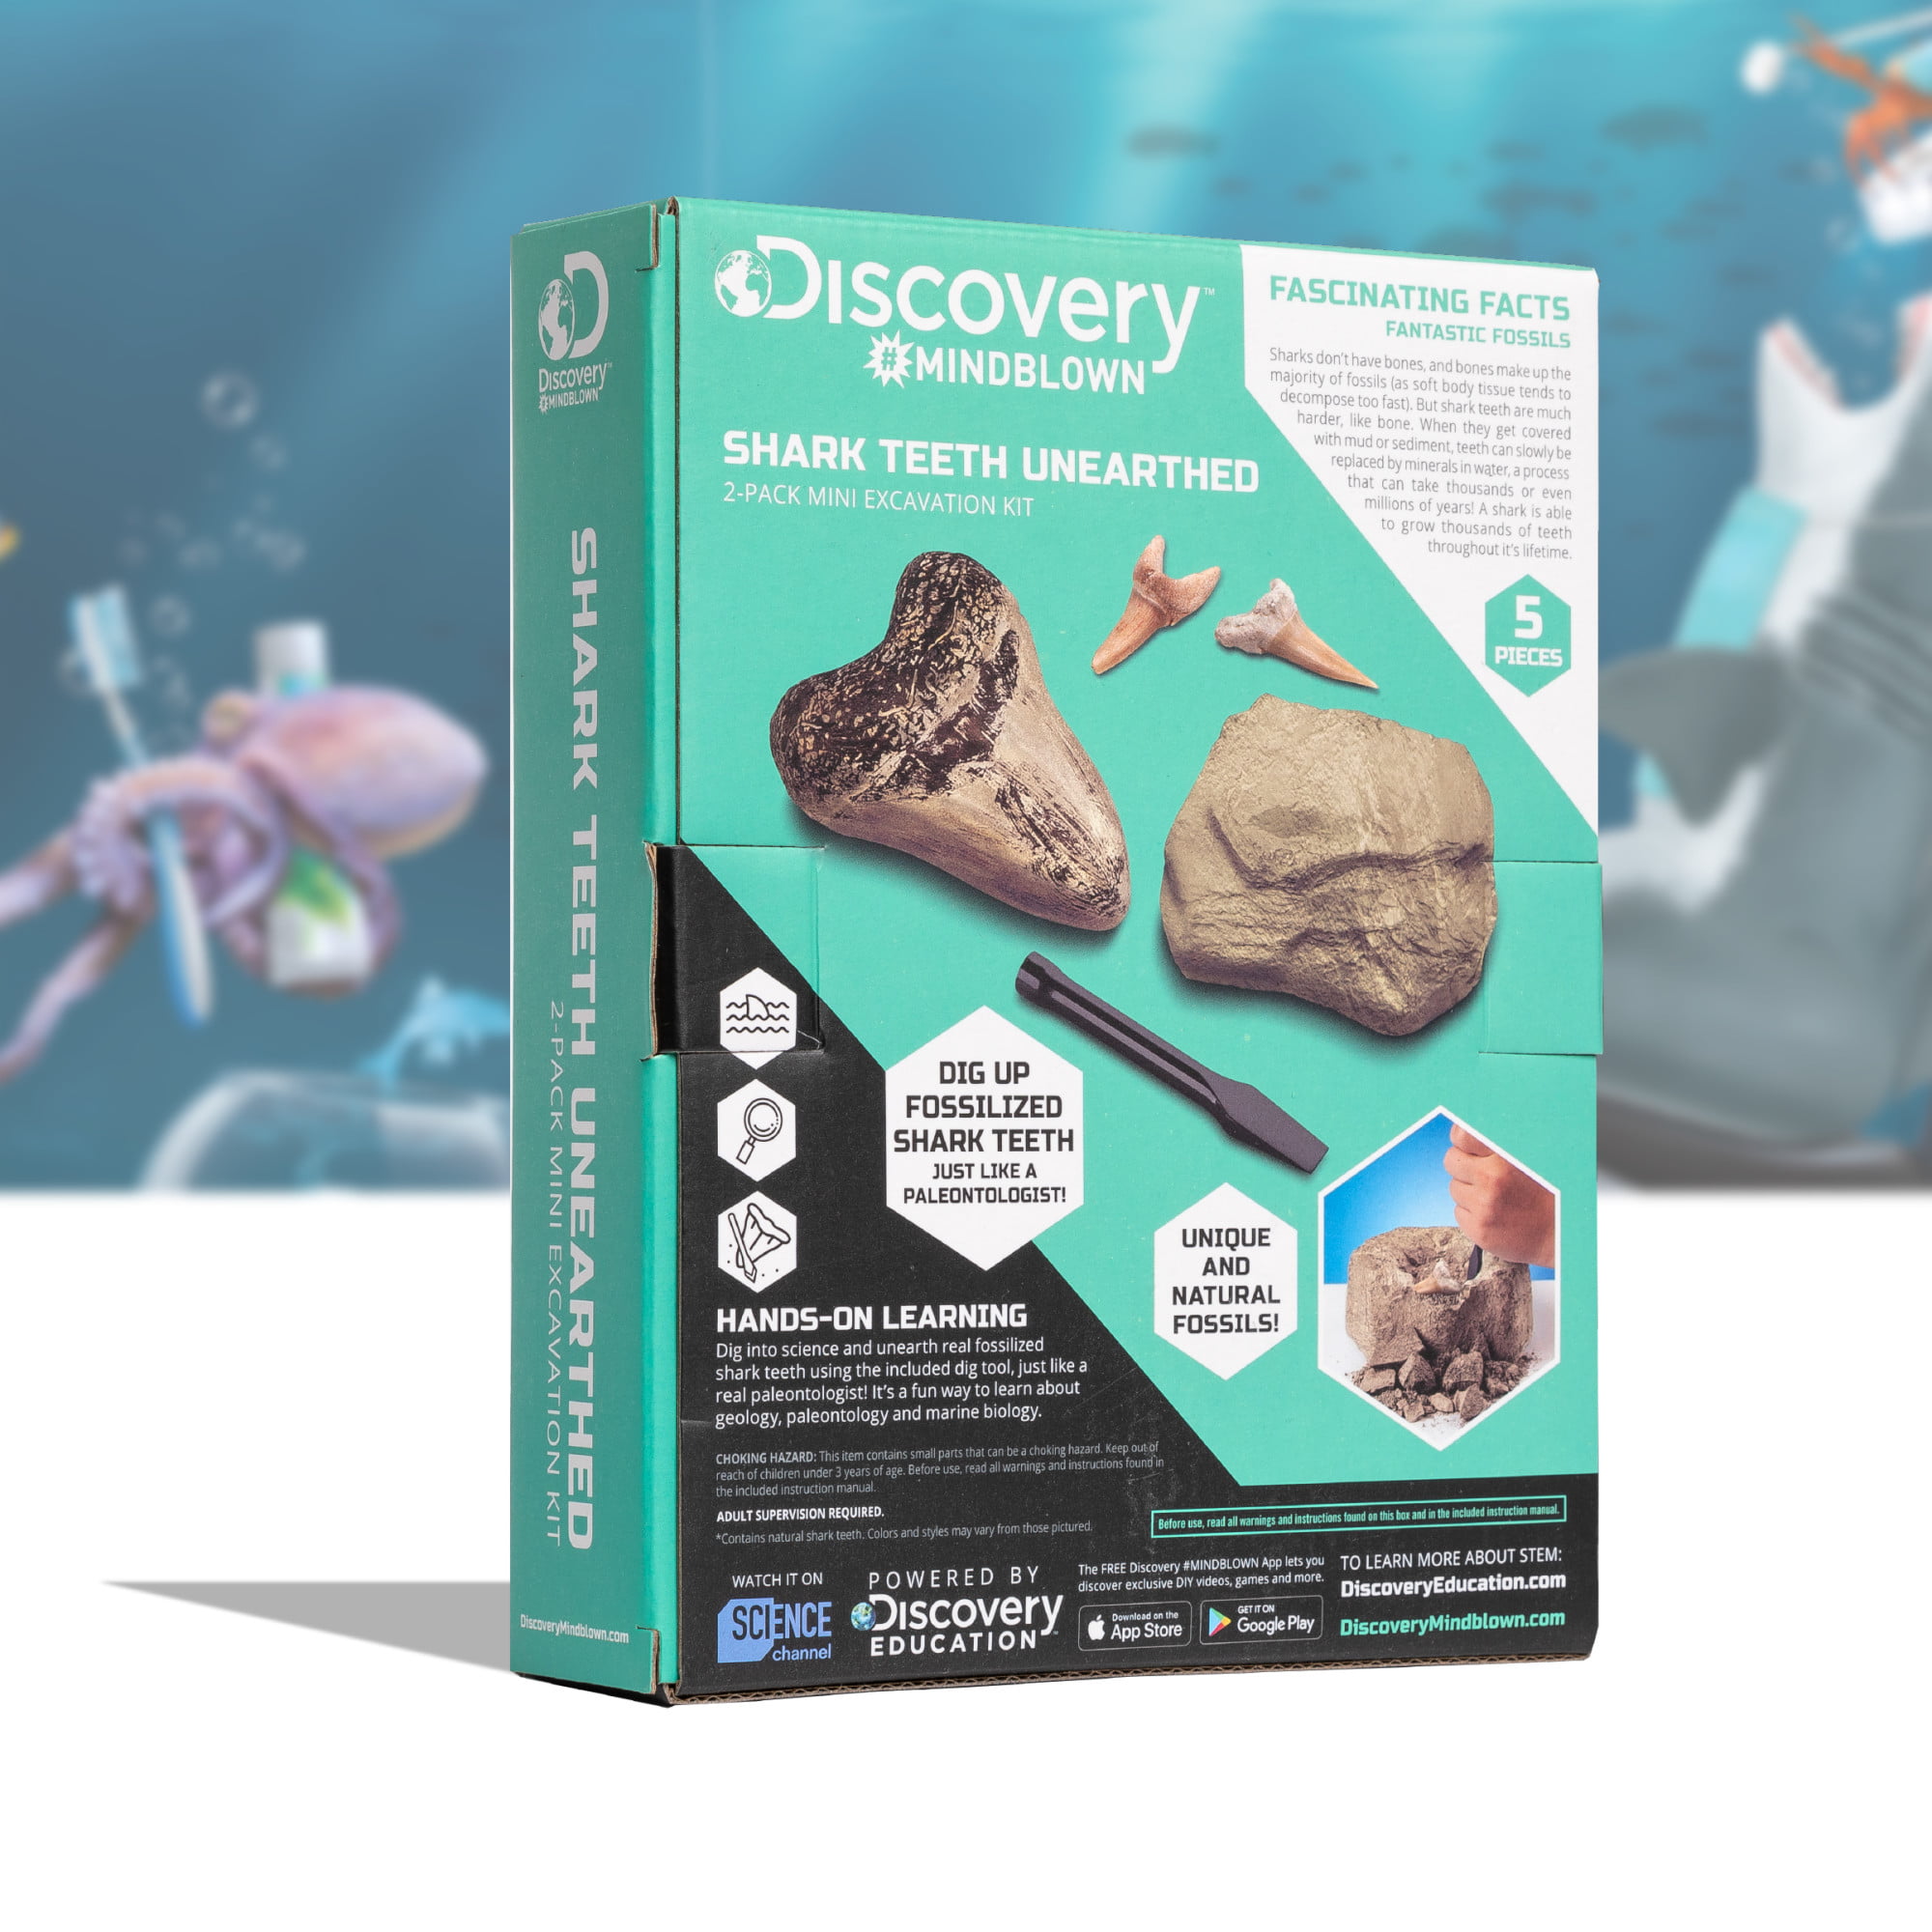 Mummy Discovery Dig Kit Experiment Learn Science Discover Create Fun Education